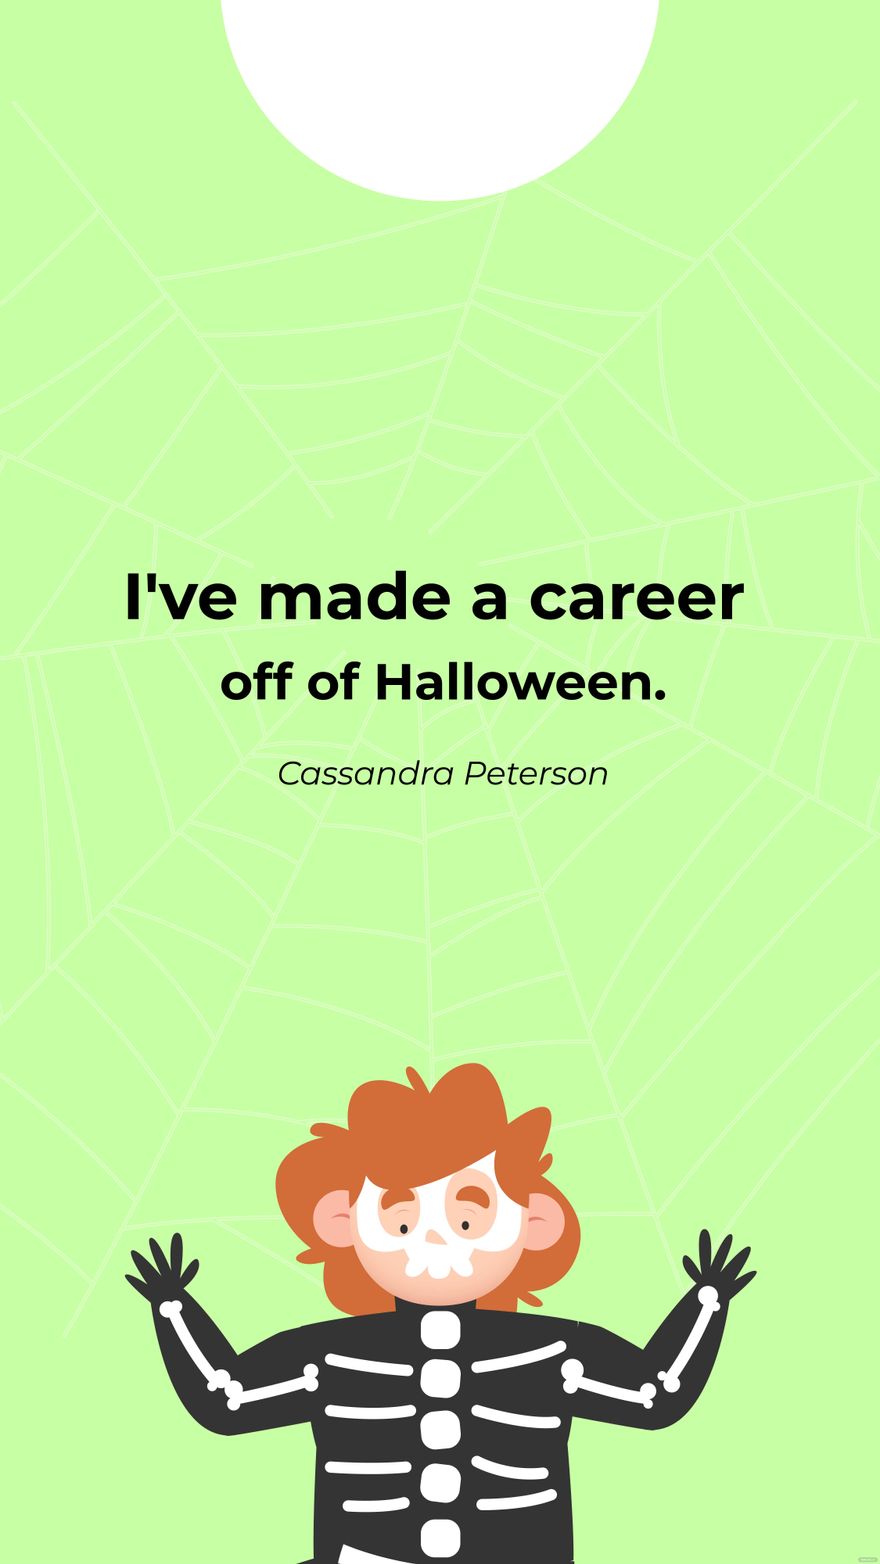 Cassandra Peterson- I've made a career off of Halloween. in JPG